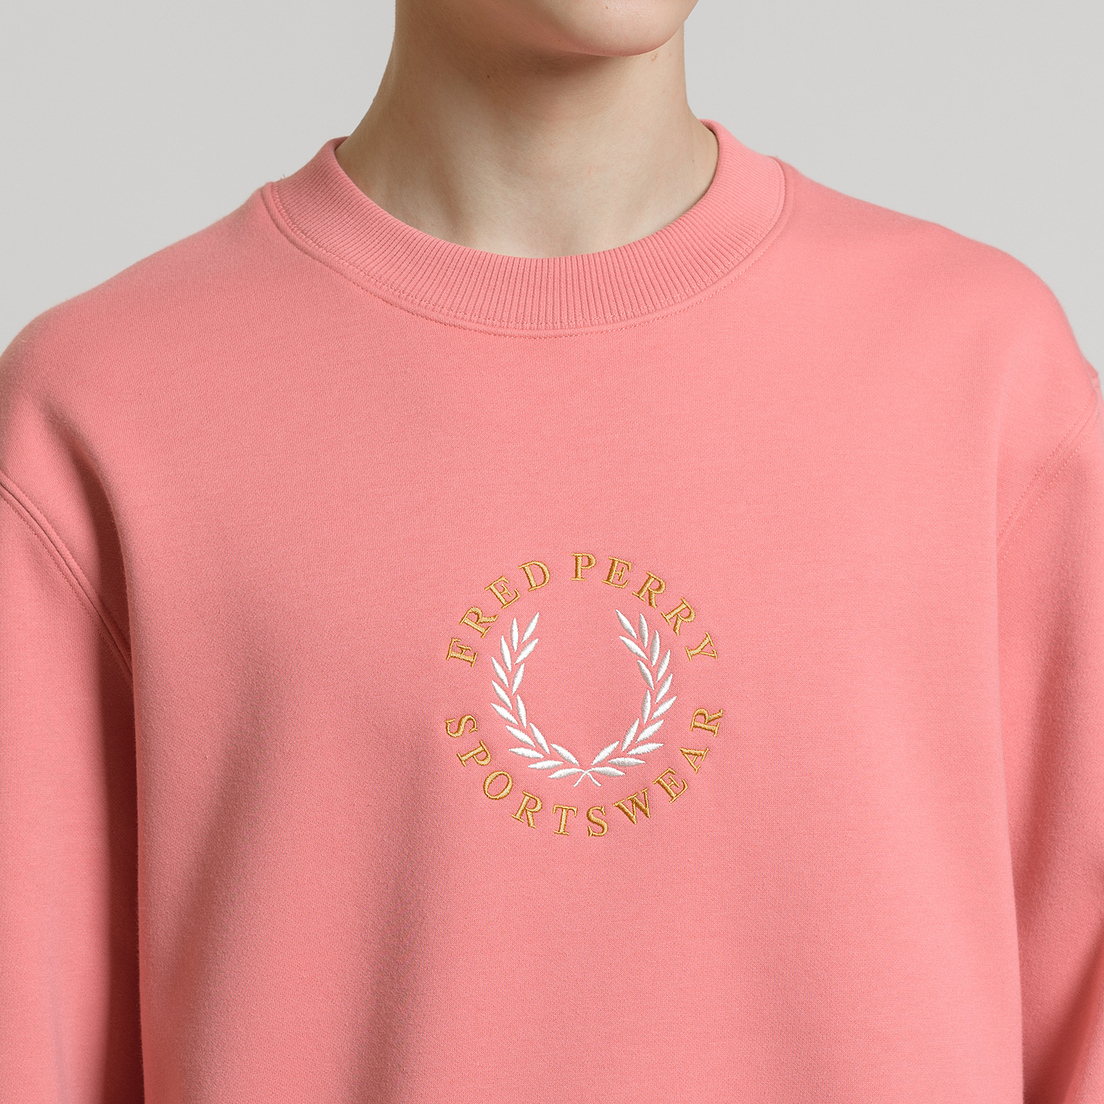 Fred Perry Мужская толстовка Oversized Archive Branding Embroidered